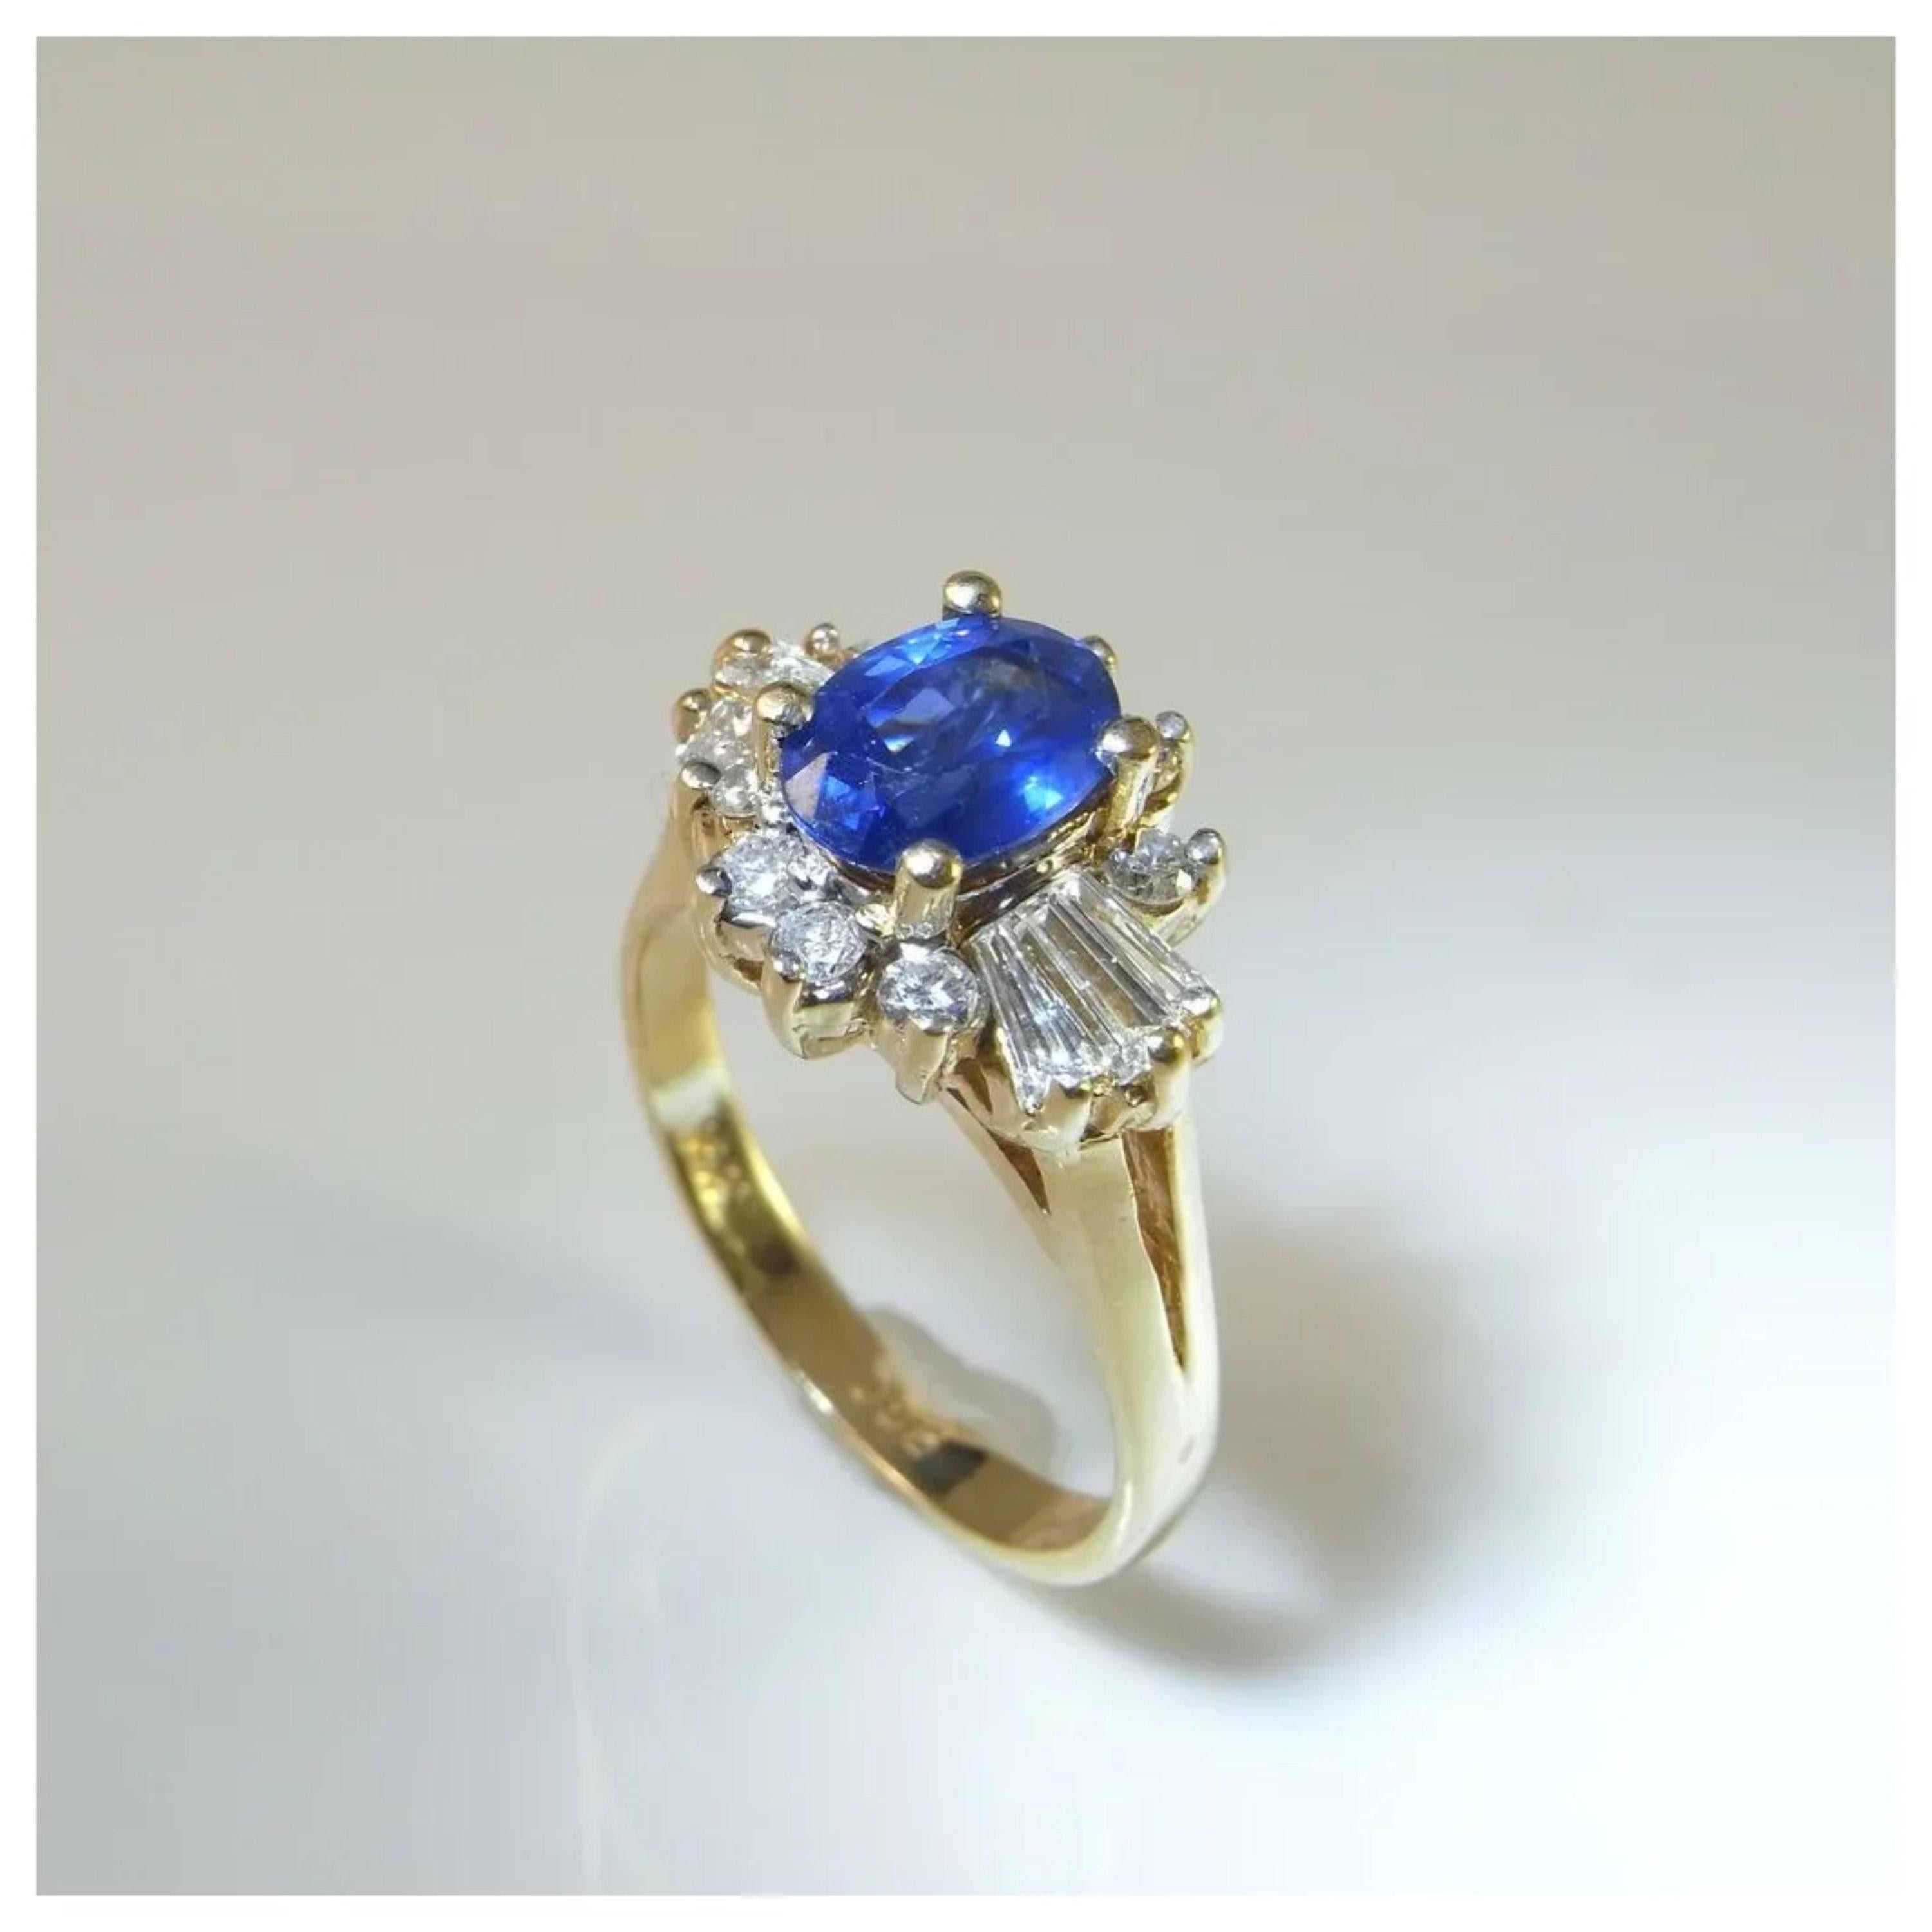 For Sale:  Floral Oval Cut Sapphire Diamond Engagement Ring, Art Deco Sapphire Diamond Ring 3